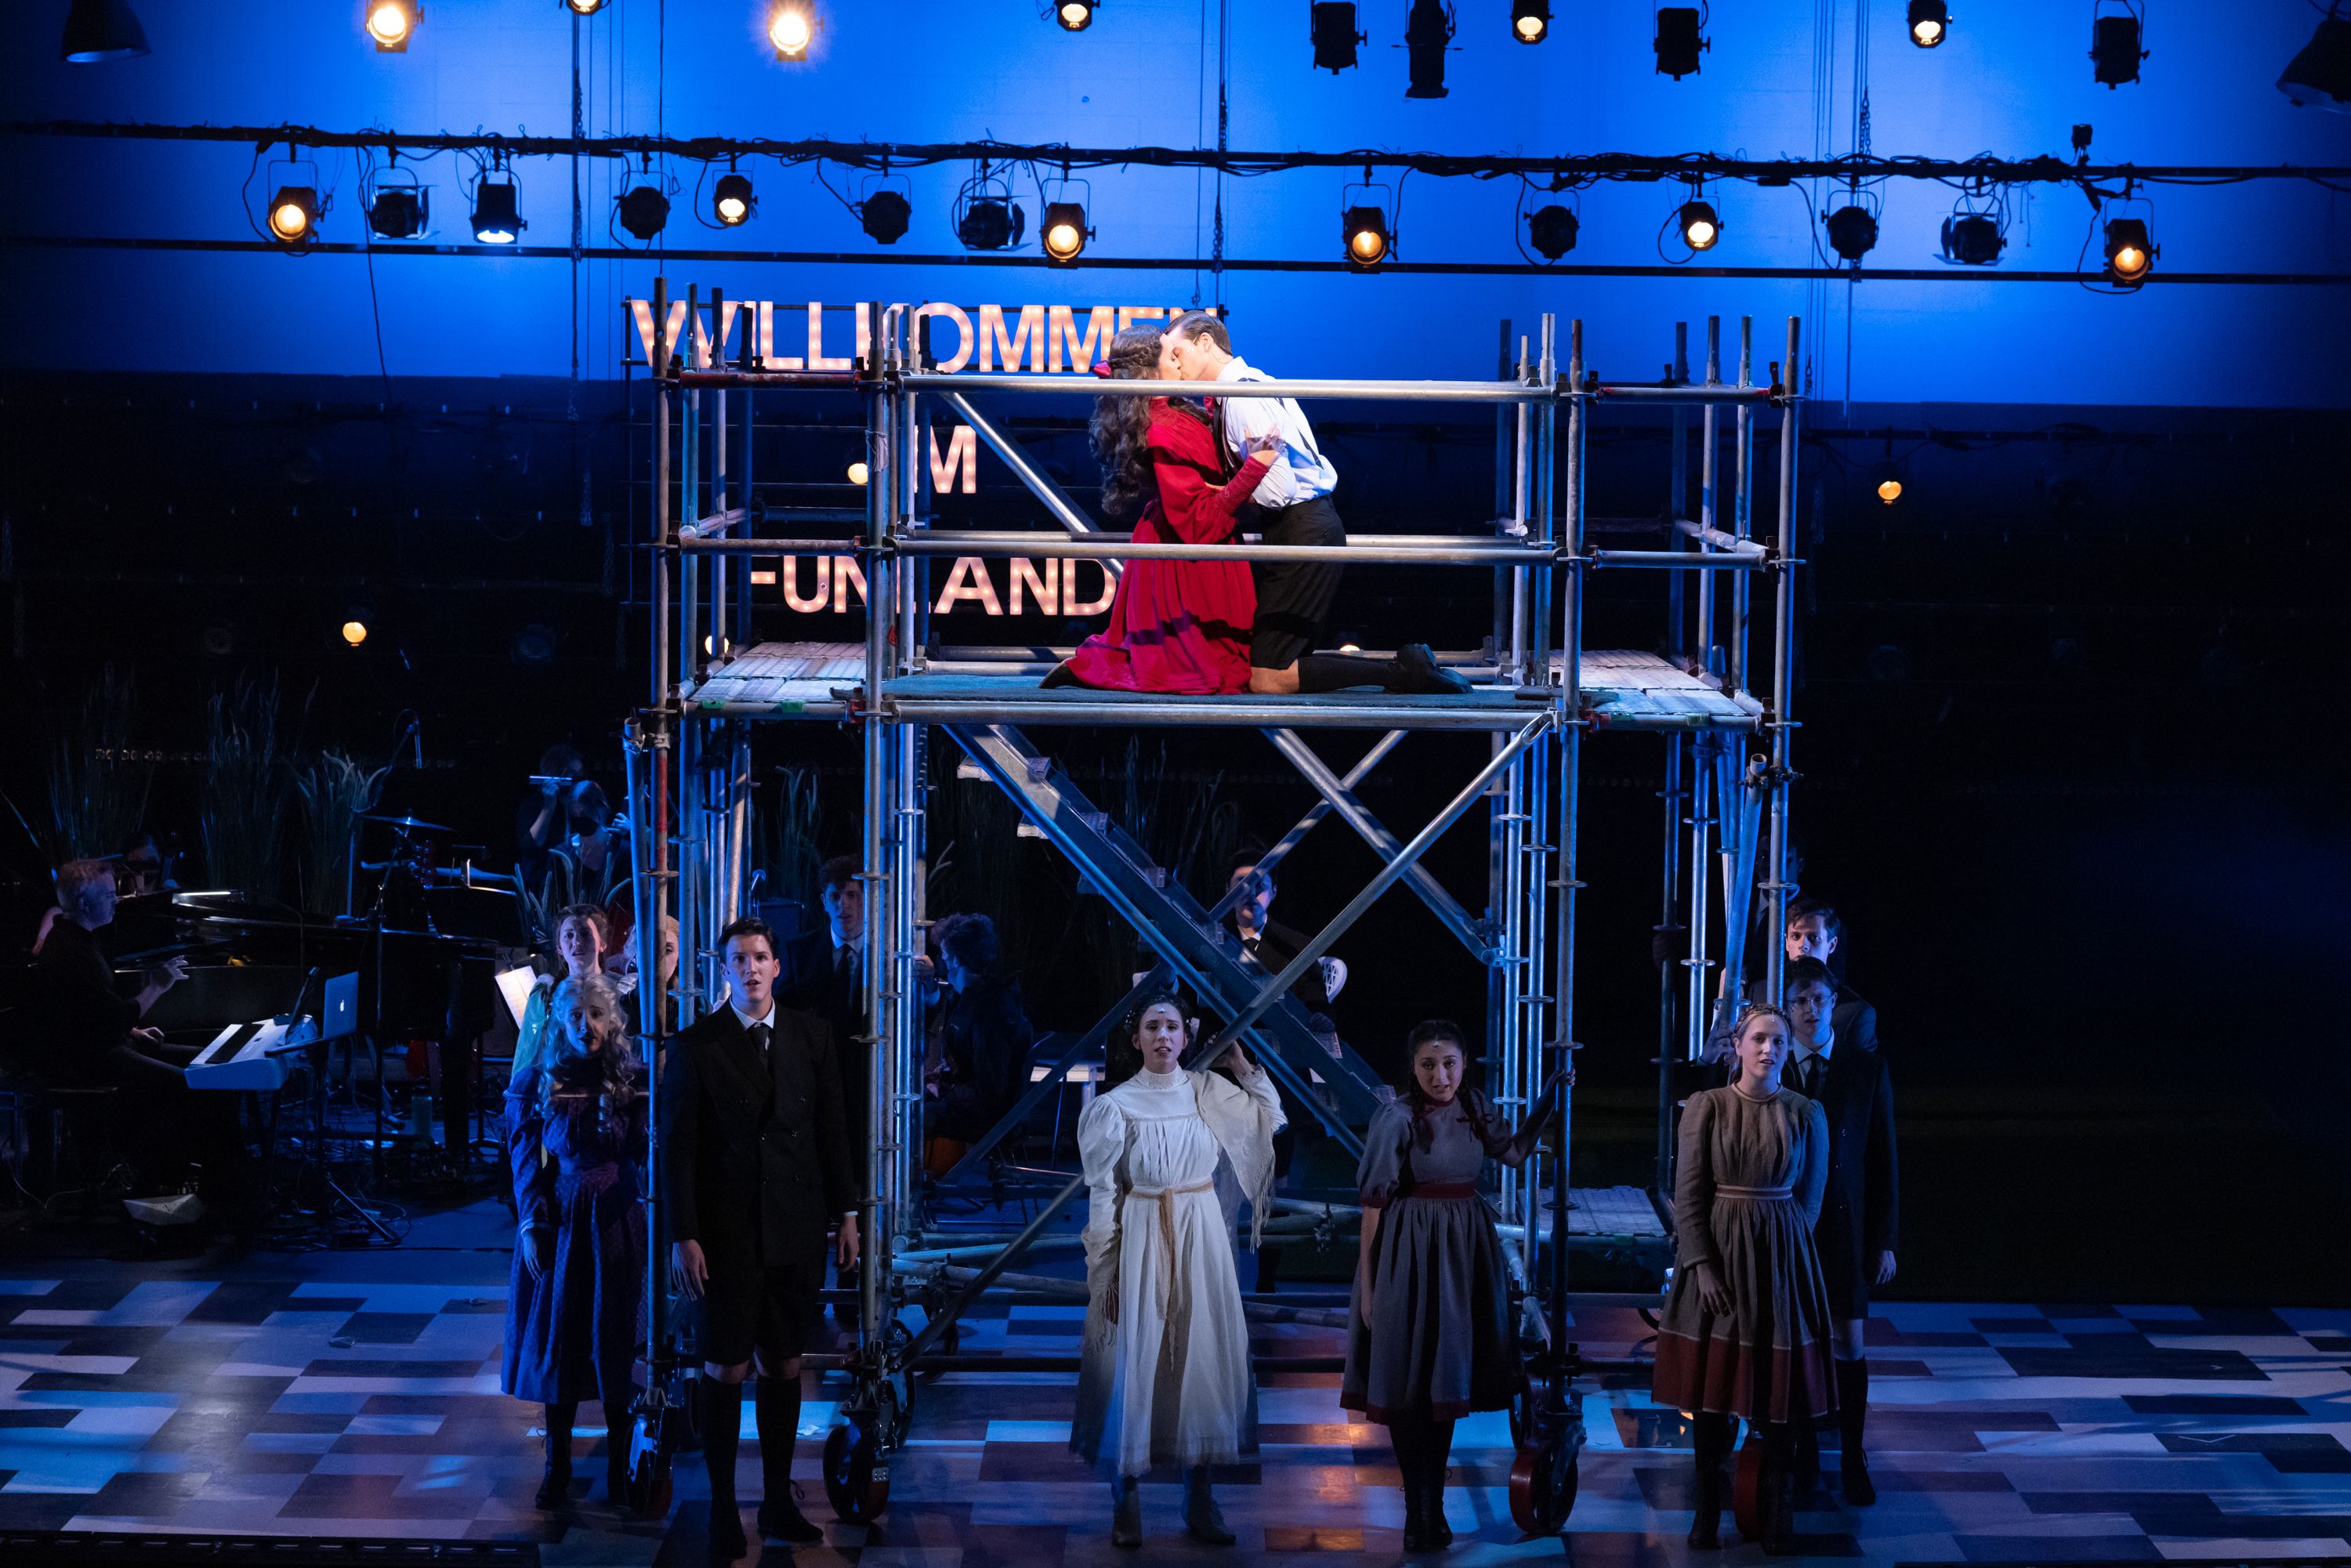 Spring Awakening production photo, including scaffold and all members of cast singing